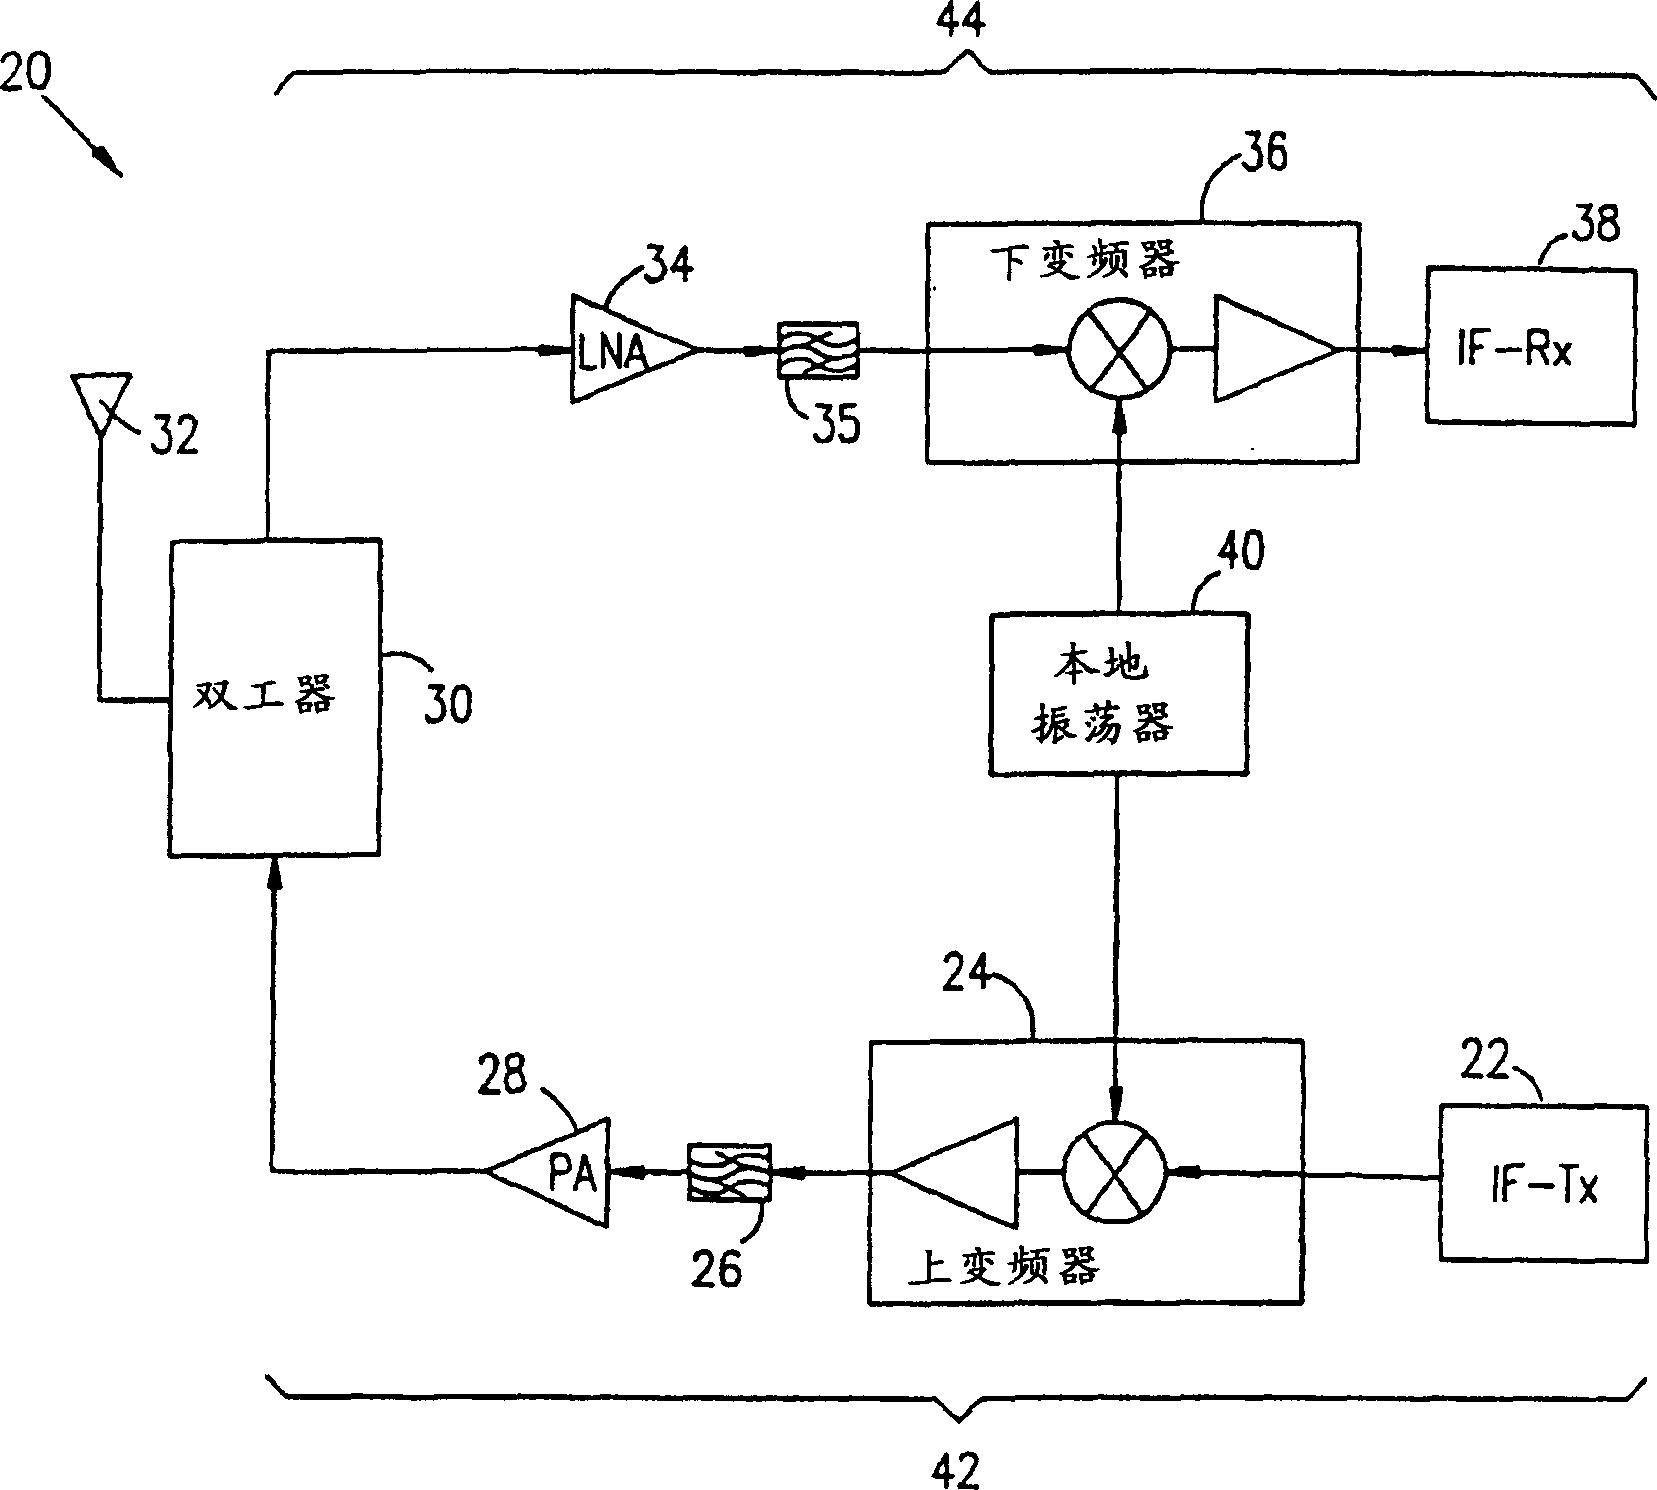 Full-duplex transceiver with distributed duplexing function